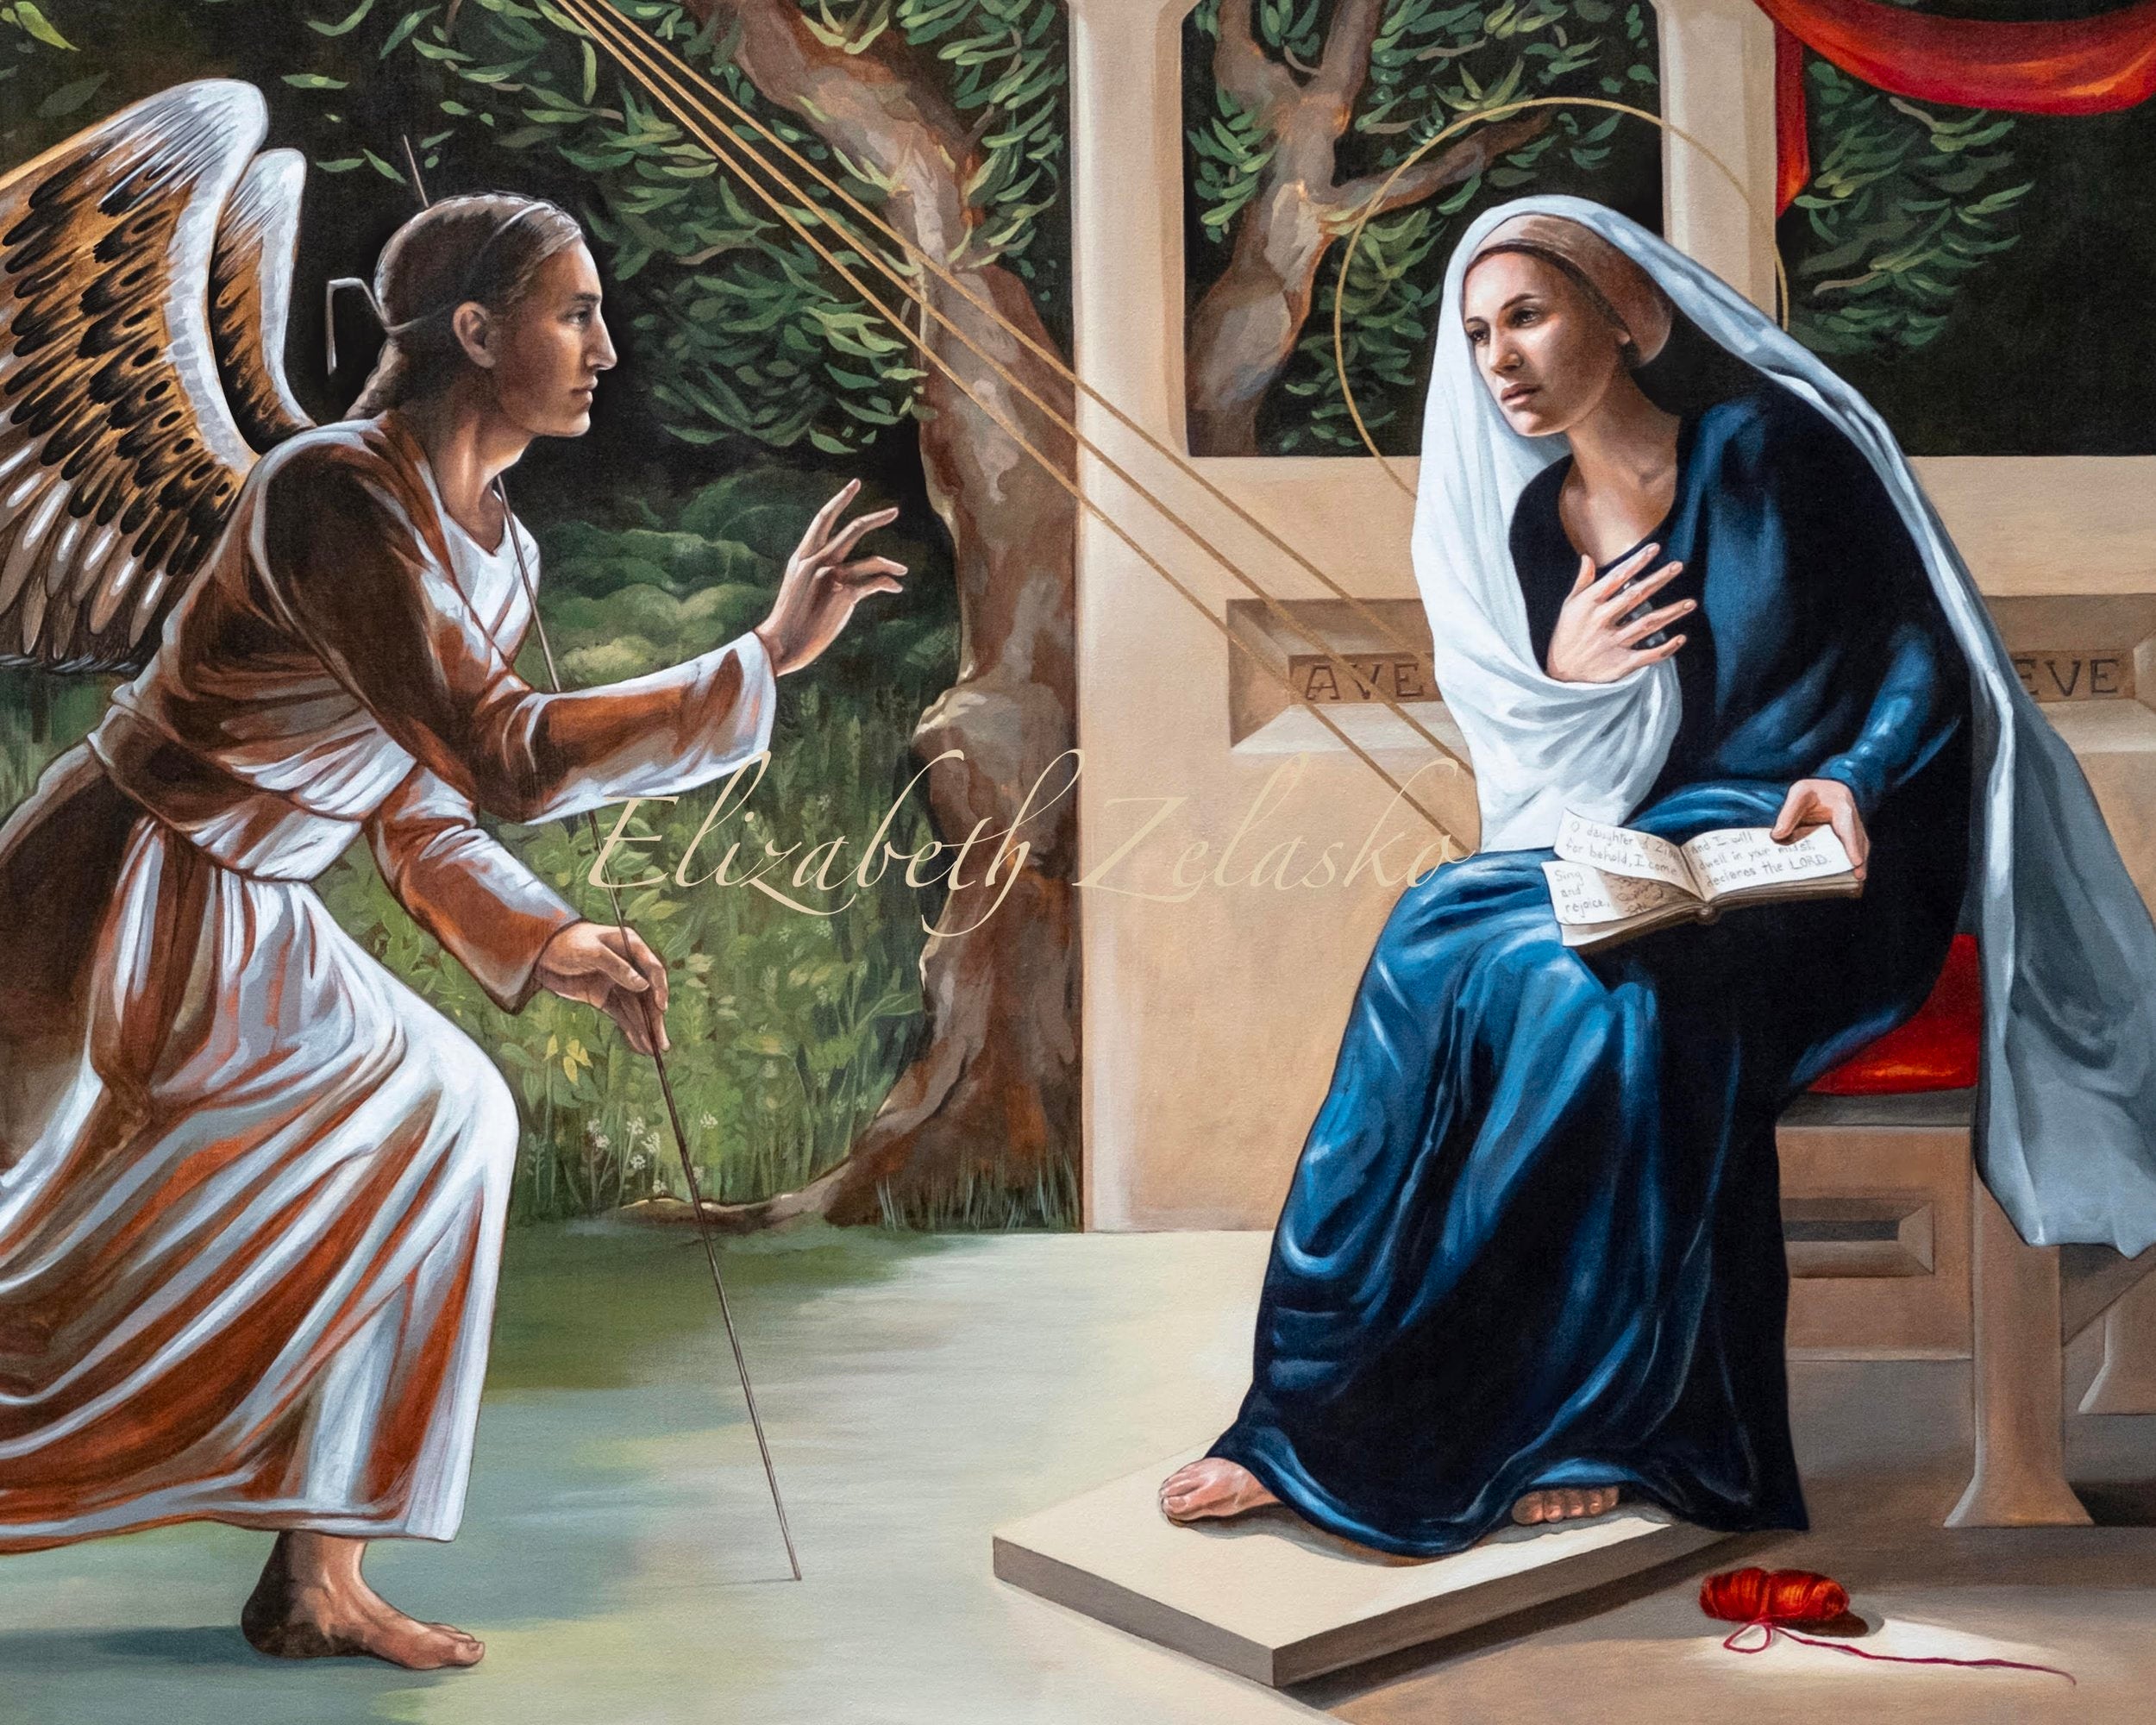 The Annunciation, commissioned by the Augustine Institute